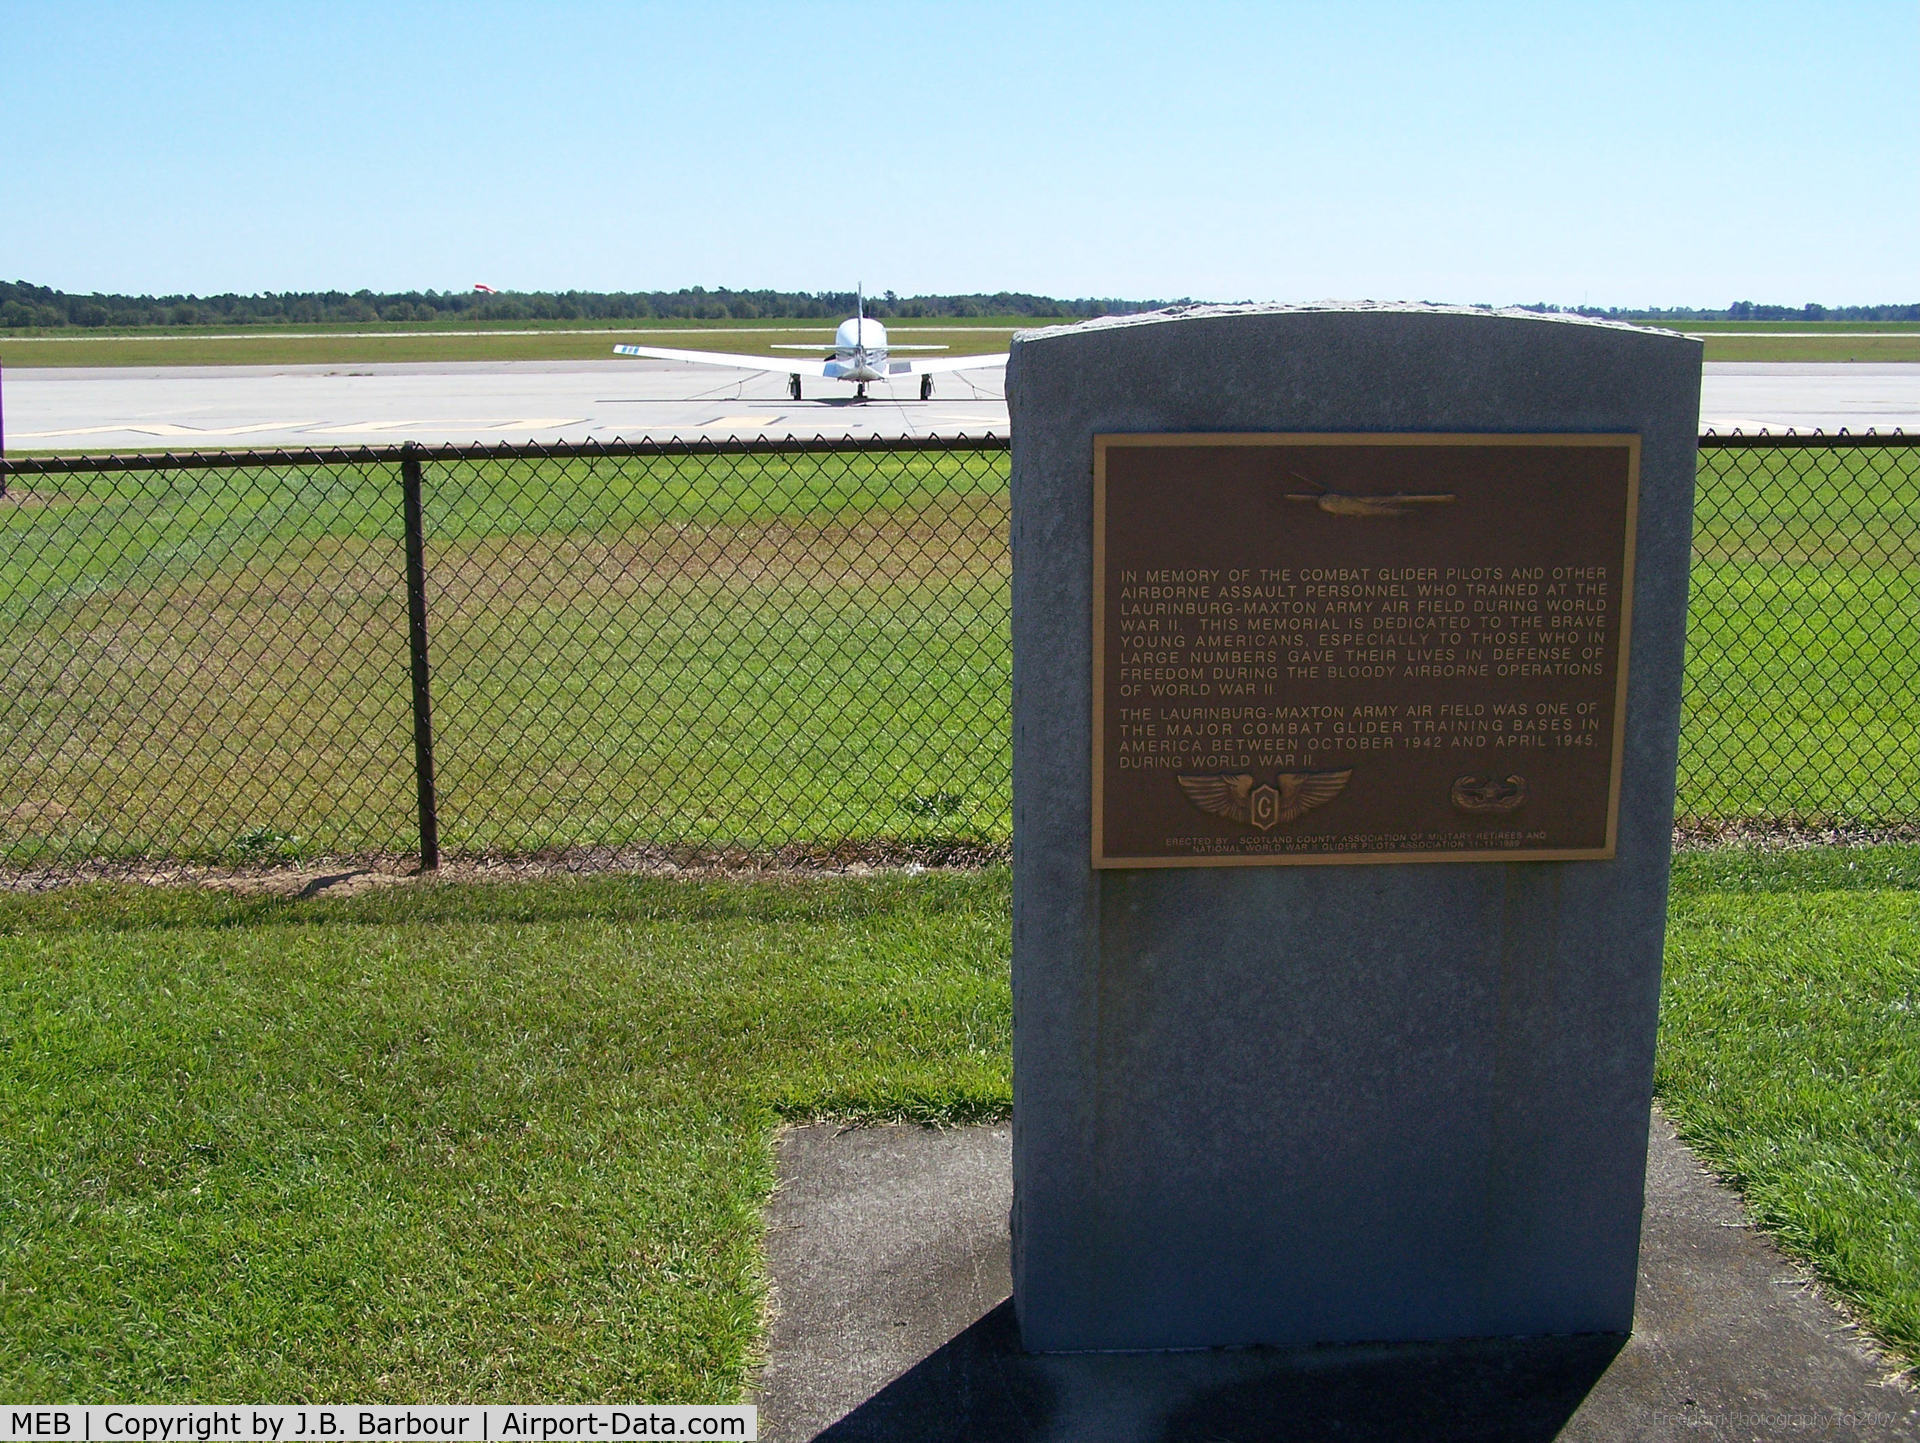 Laurinburg-maxton Airport (MEB) - The airport has a lot of history.  Many airports like this all across the nation are suffering budget crunches and the are being closed.  It would be awsome if people would get out of the comfort of their homes and visted these location like these and hel